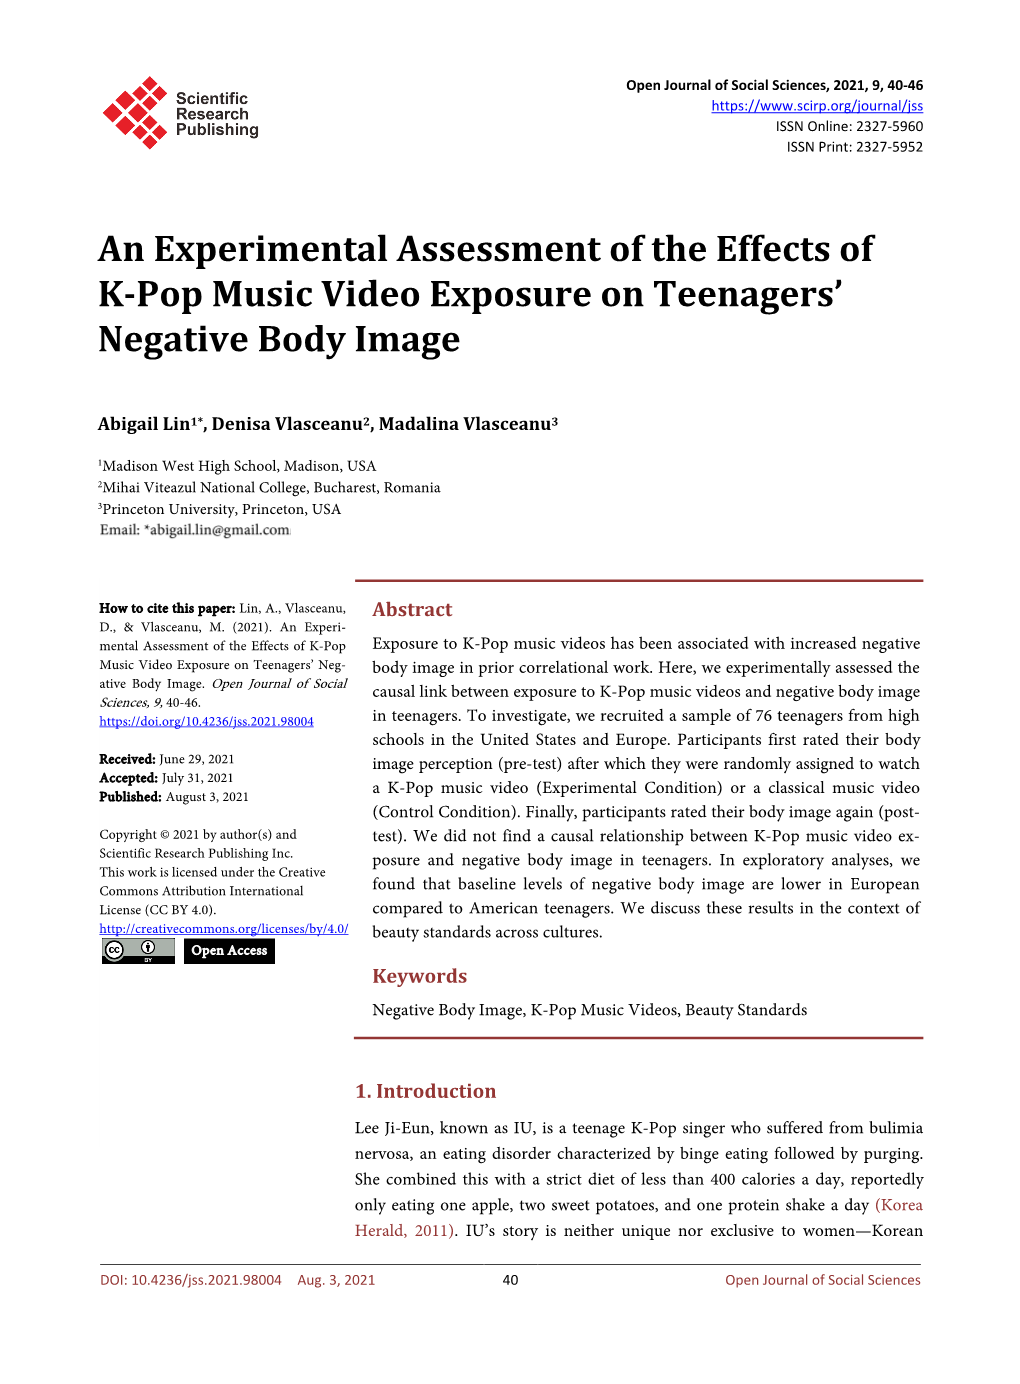 An Experimental Assessment of the Effects of K-Pop Music Video Exposure on Teenagers’ Negative Body Image